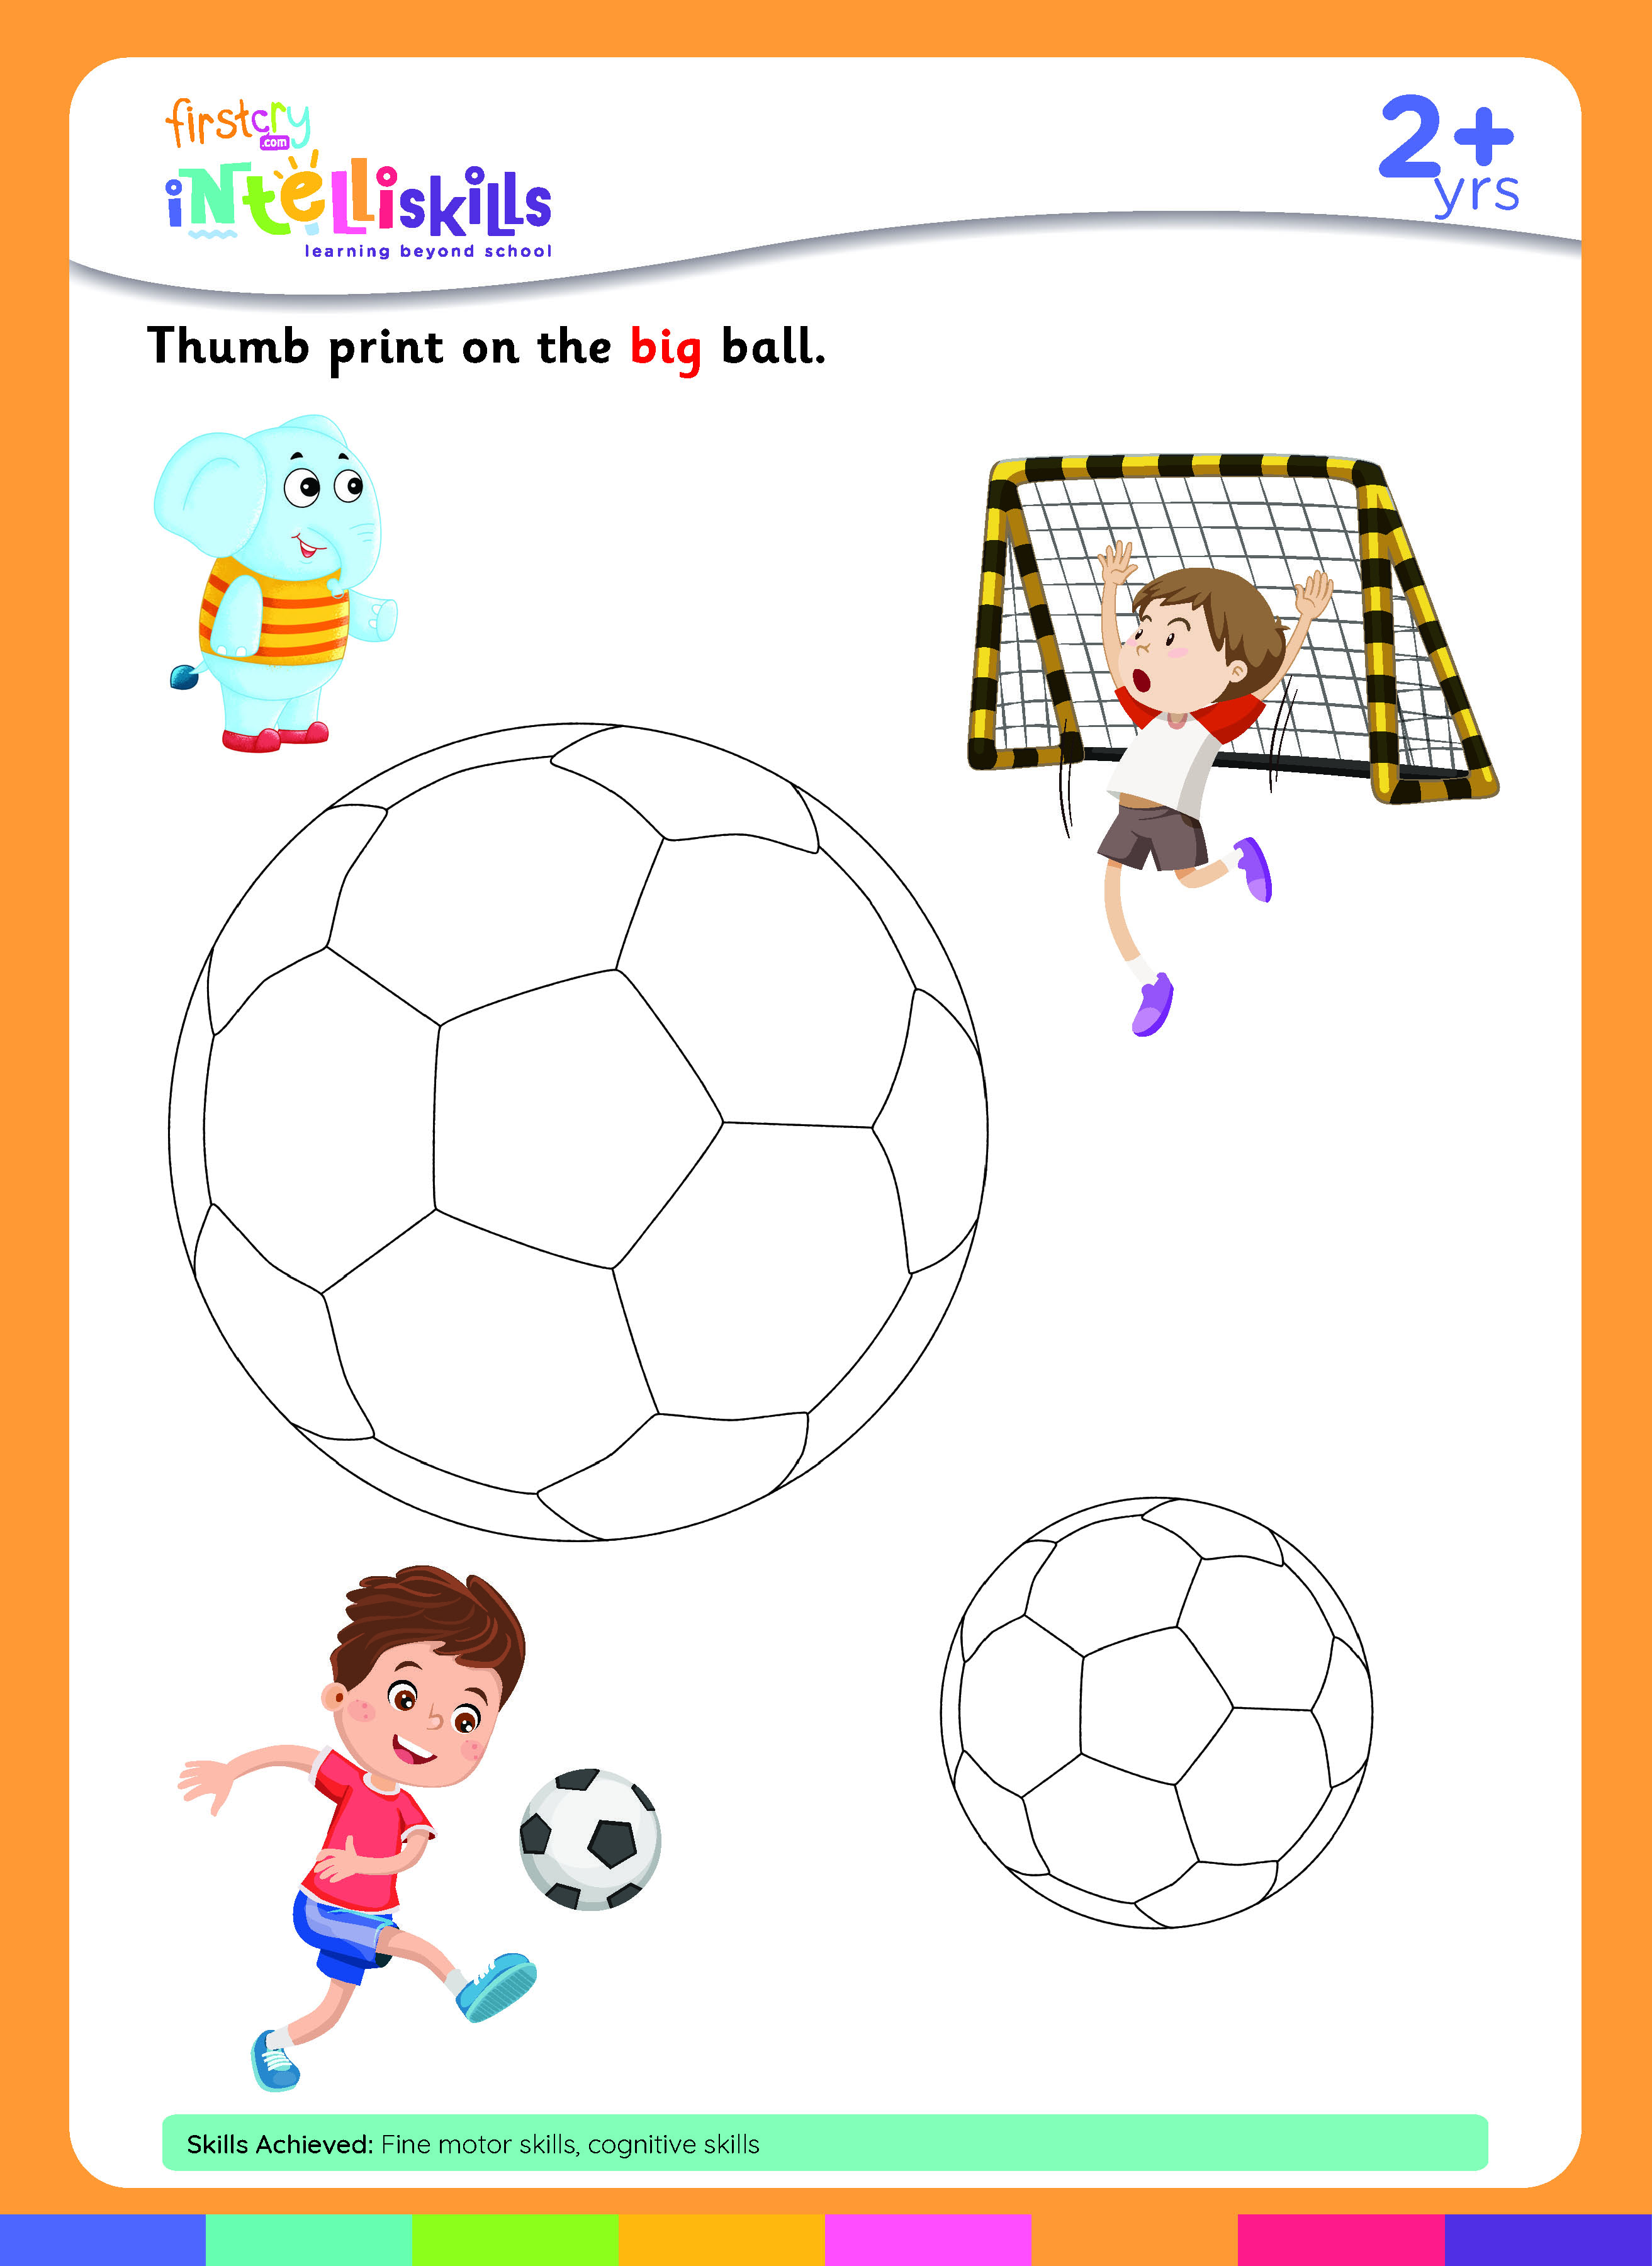 Big or small Free & Printables Worksheet at FirstCry Intelli